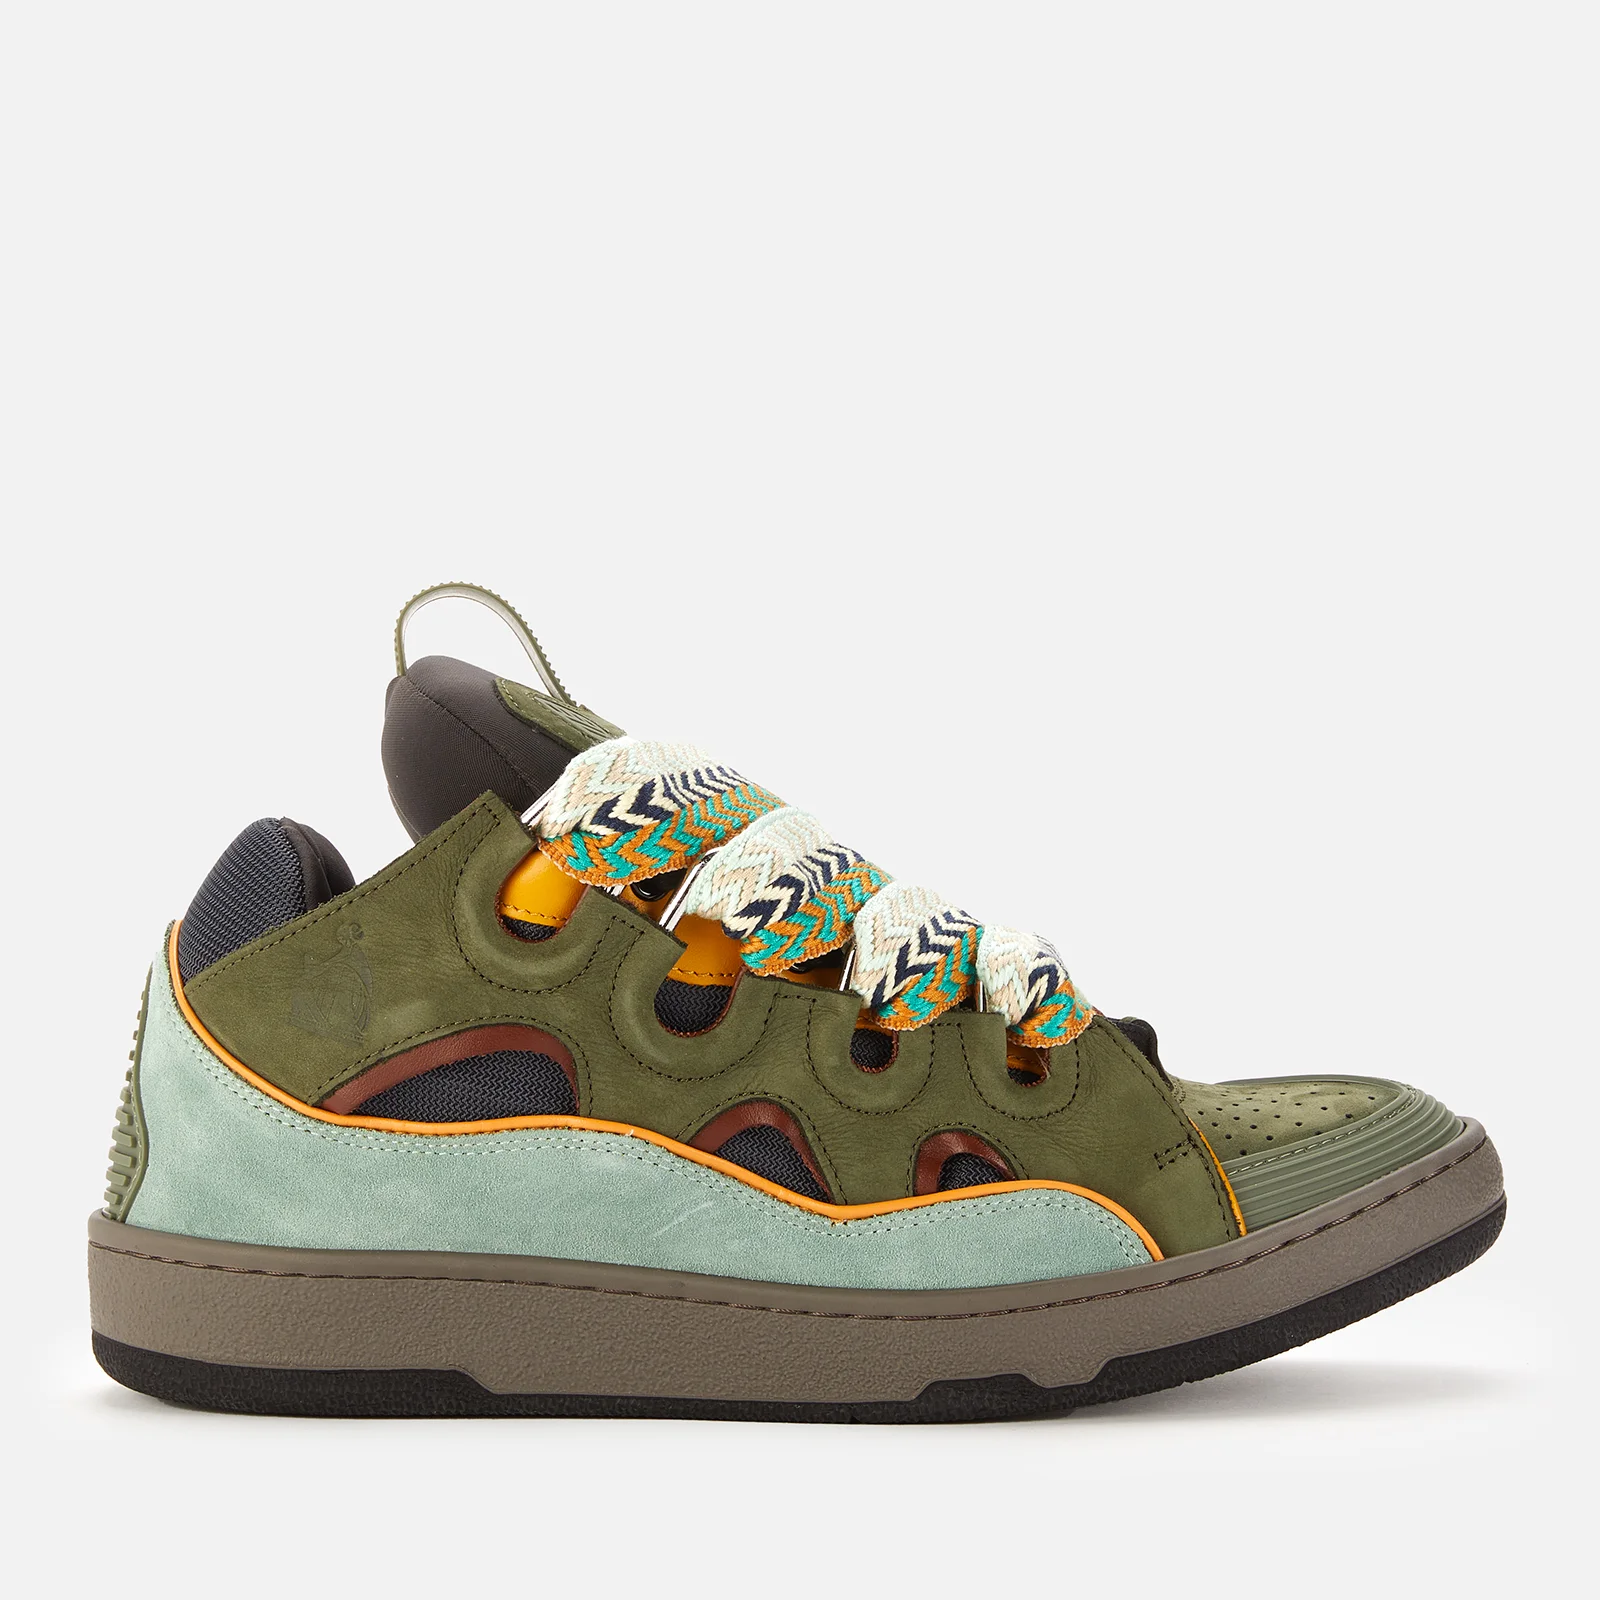 Lanvin Men's Curb Trainers - Moss Green/Grey Image 1